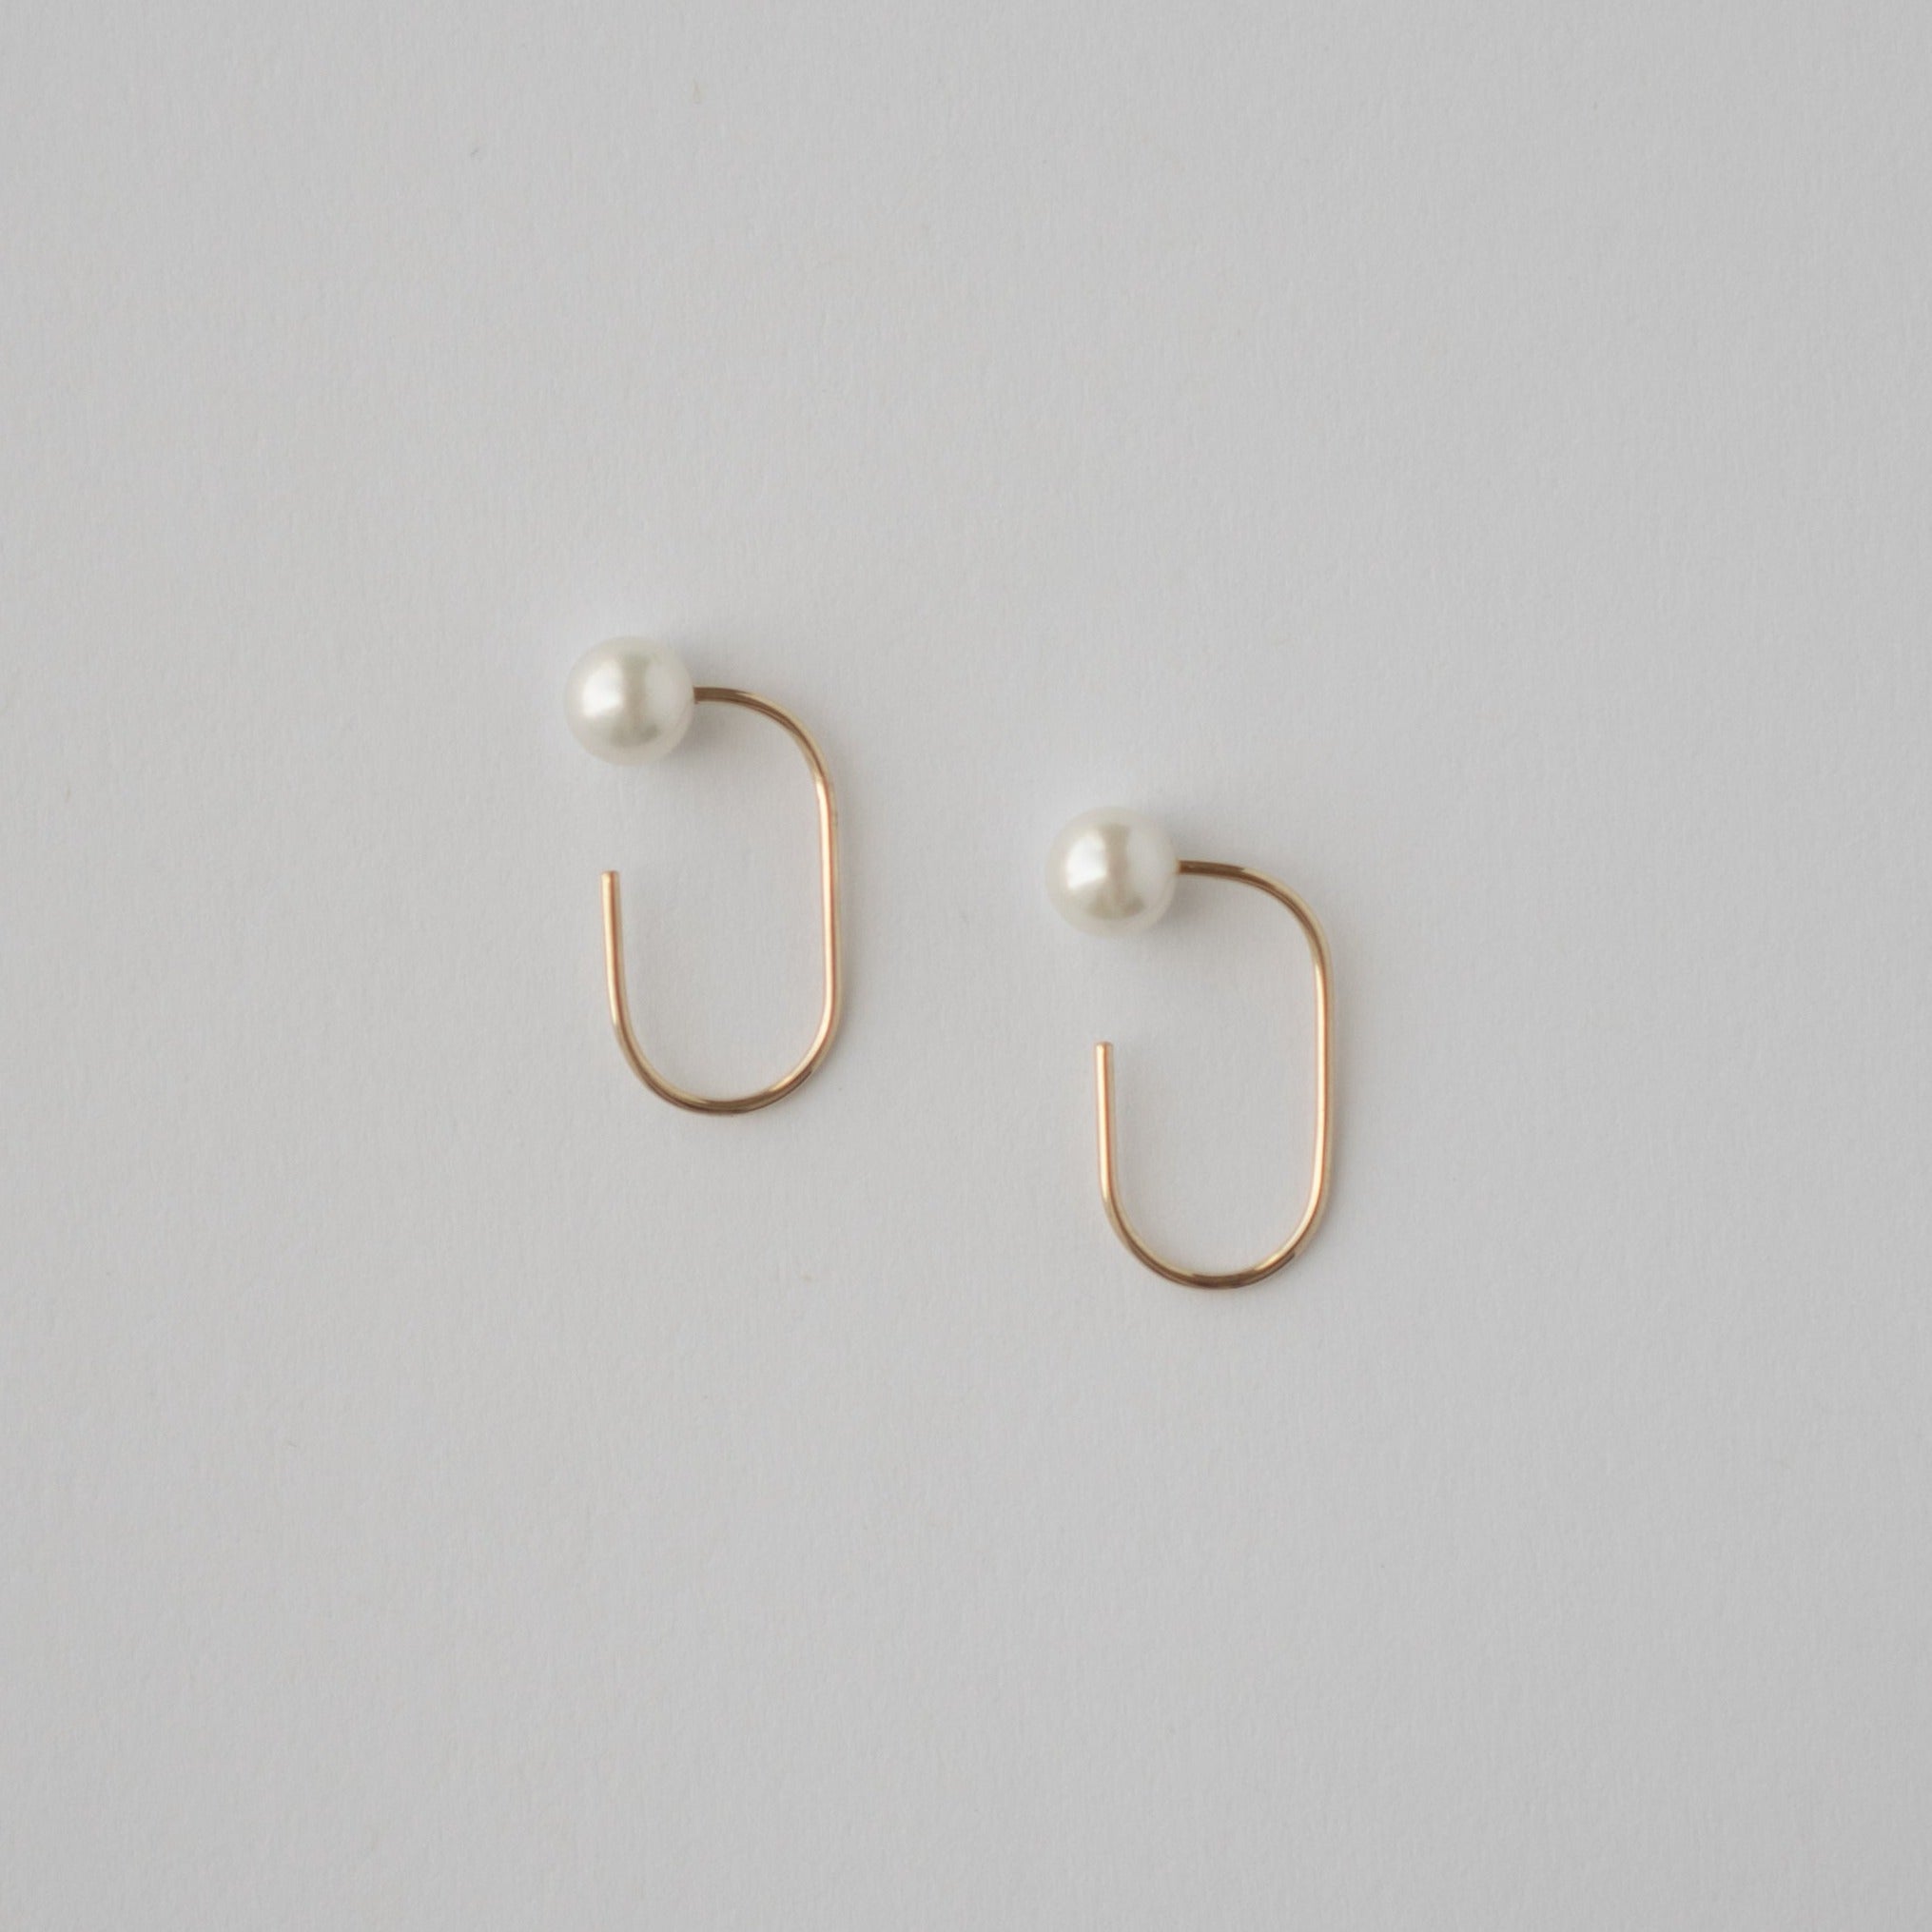 Sigi small uniqe earrings in 14k yellow gold with pearls